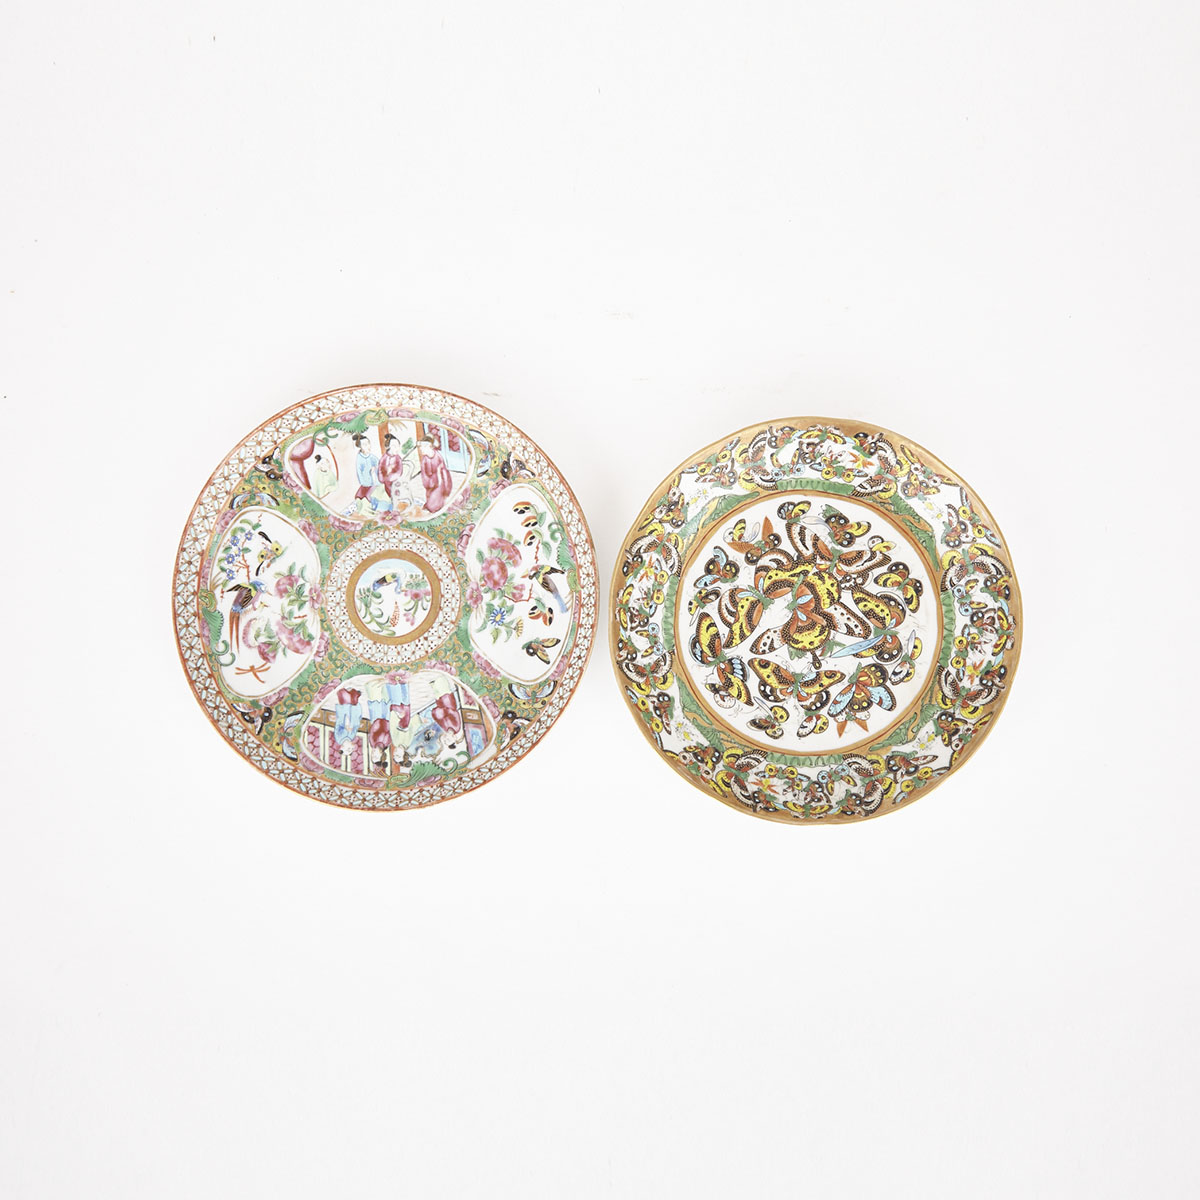 Two Famille Rose Dishes, early 20th Century